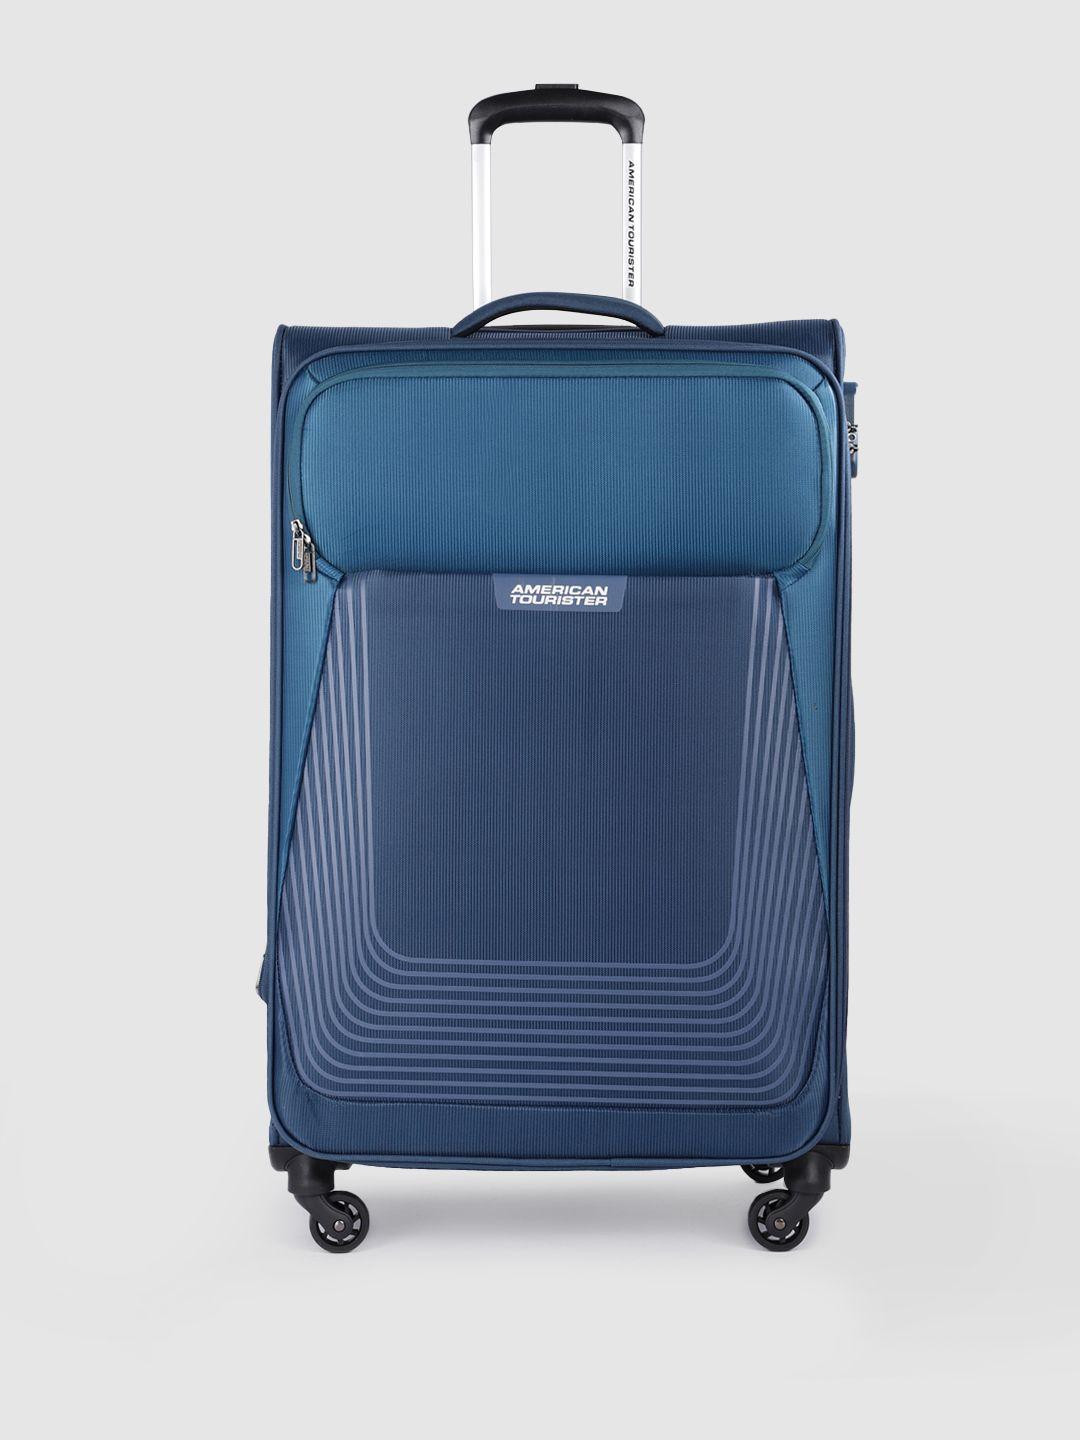 american-tourister-amt-southside-lite-soft-sided-large-trolley-suitcase